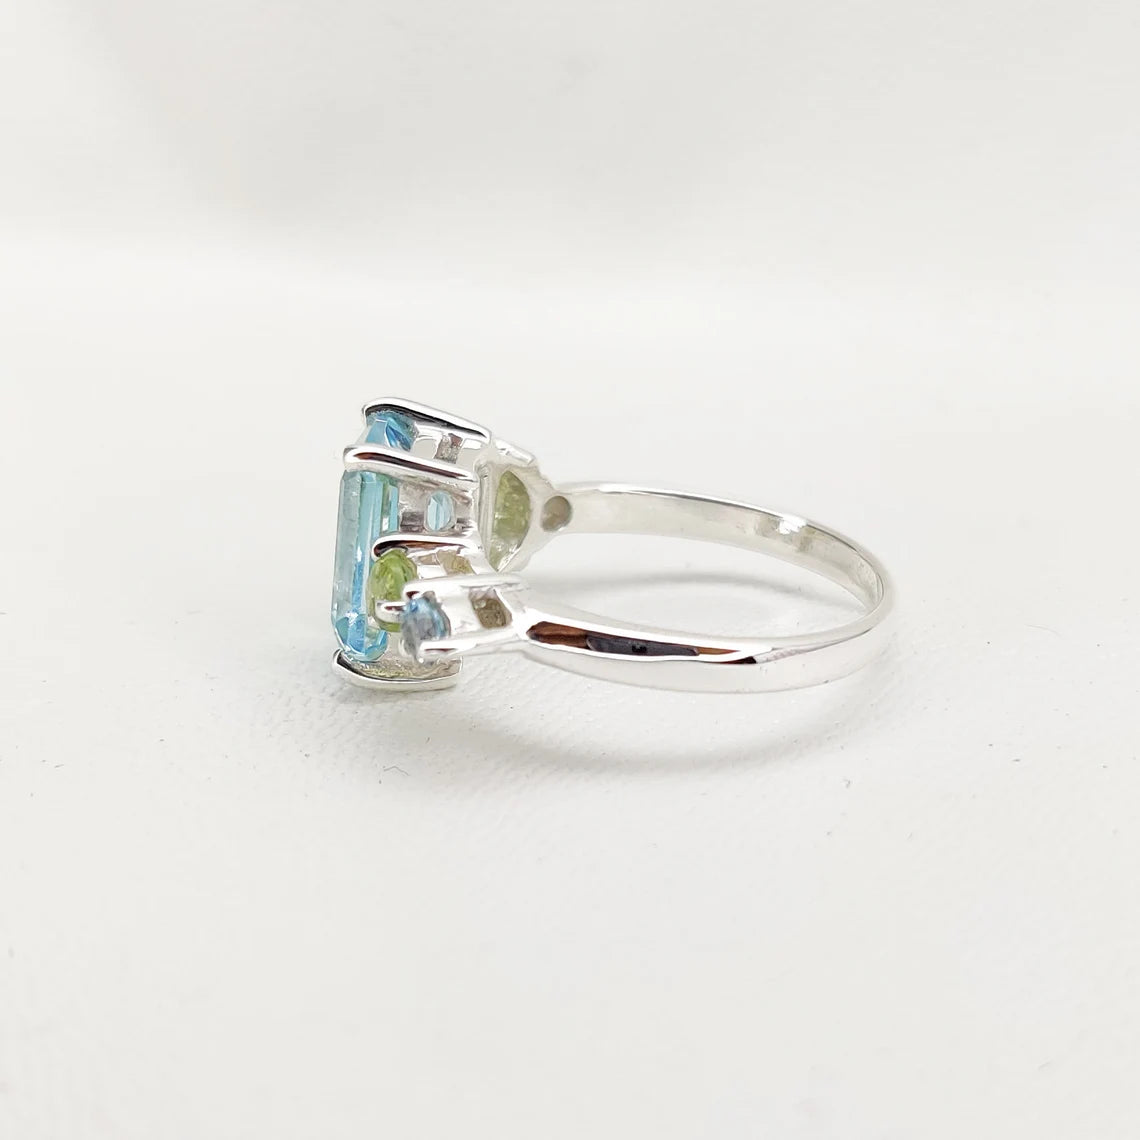 Asymmetrical Half Moon Ring - Blue Topaz and Peridot - Sterling Silver Ring